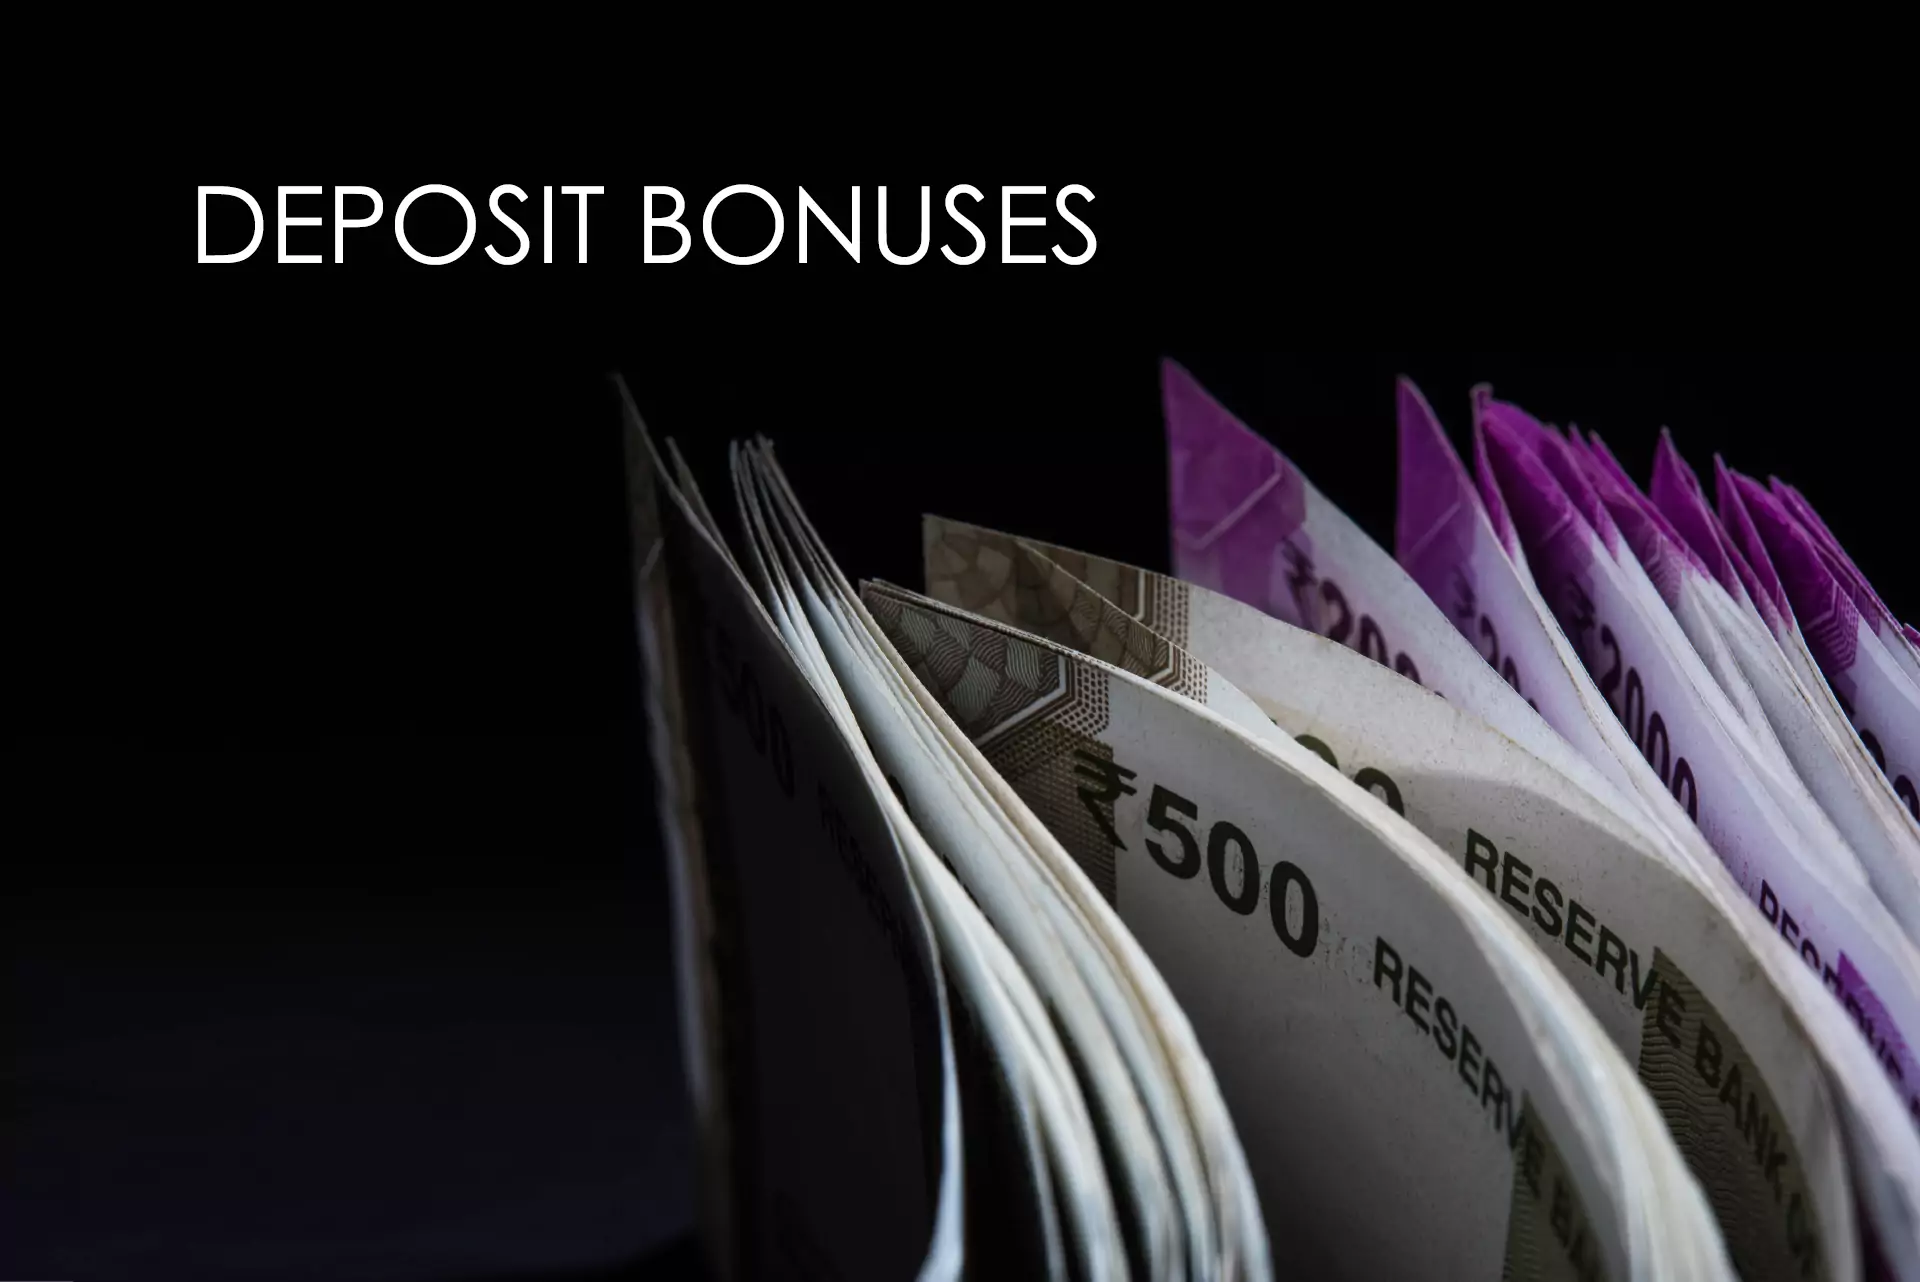 The welcome bonus depends on the amount of the first deposit.